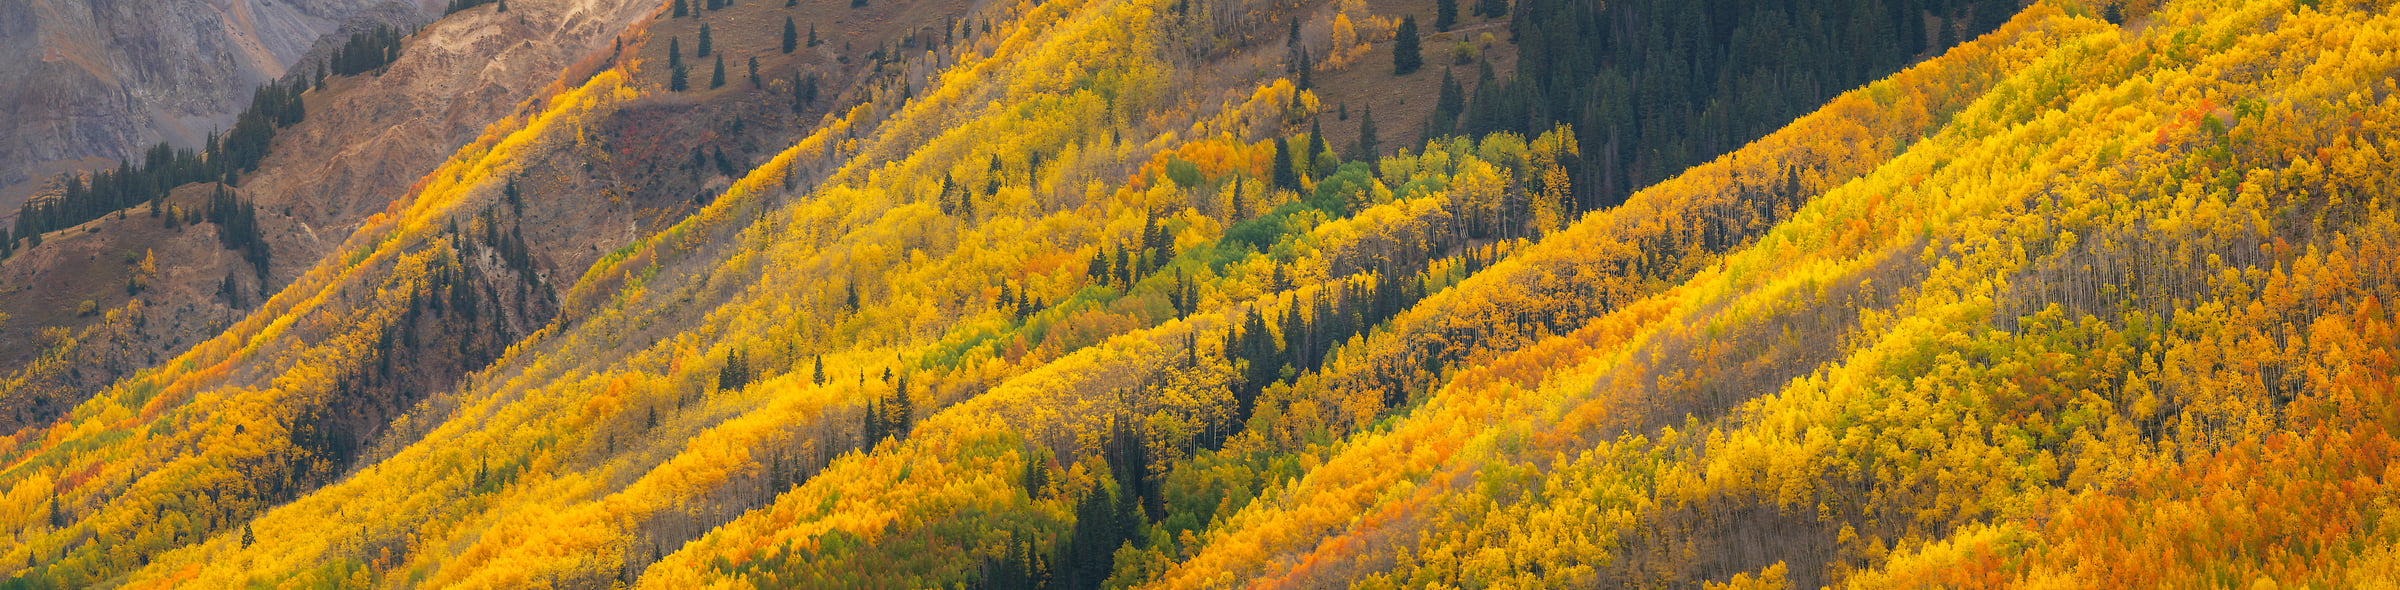 303 megapixels! A very high resolution, large-format VAST photo print of gold trees on a hillside in autumn; landscape photograph created by Jeff Lewis in Ouray, Colorado